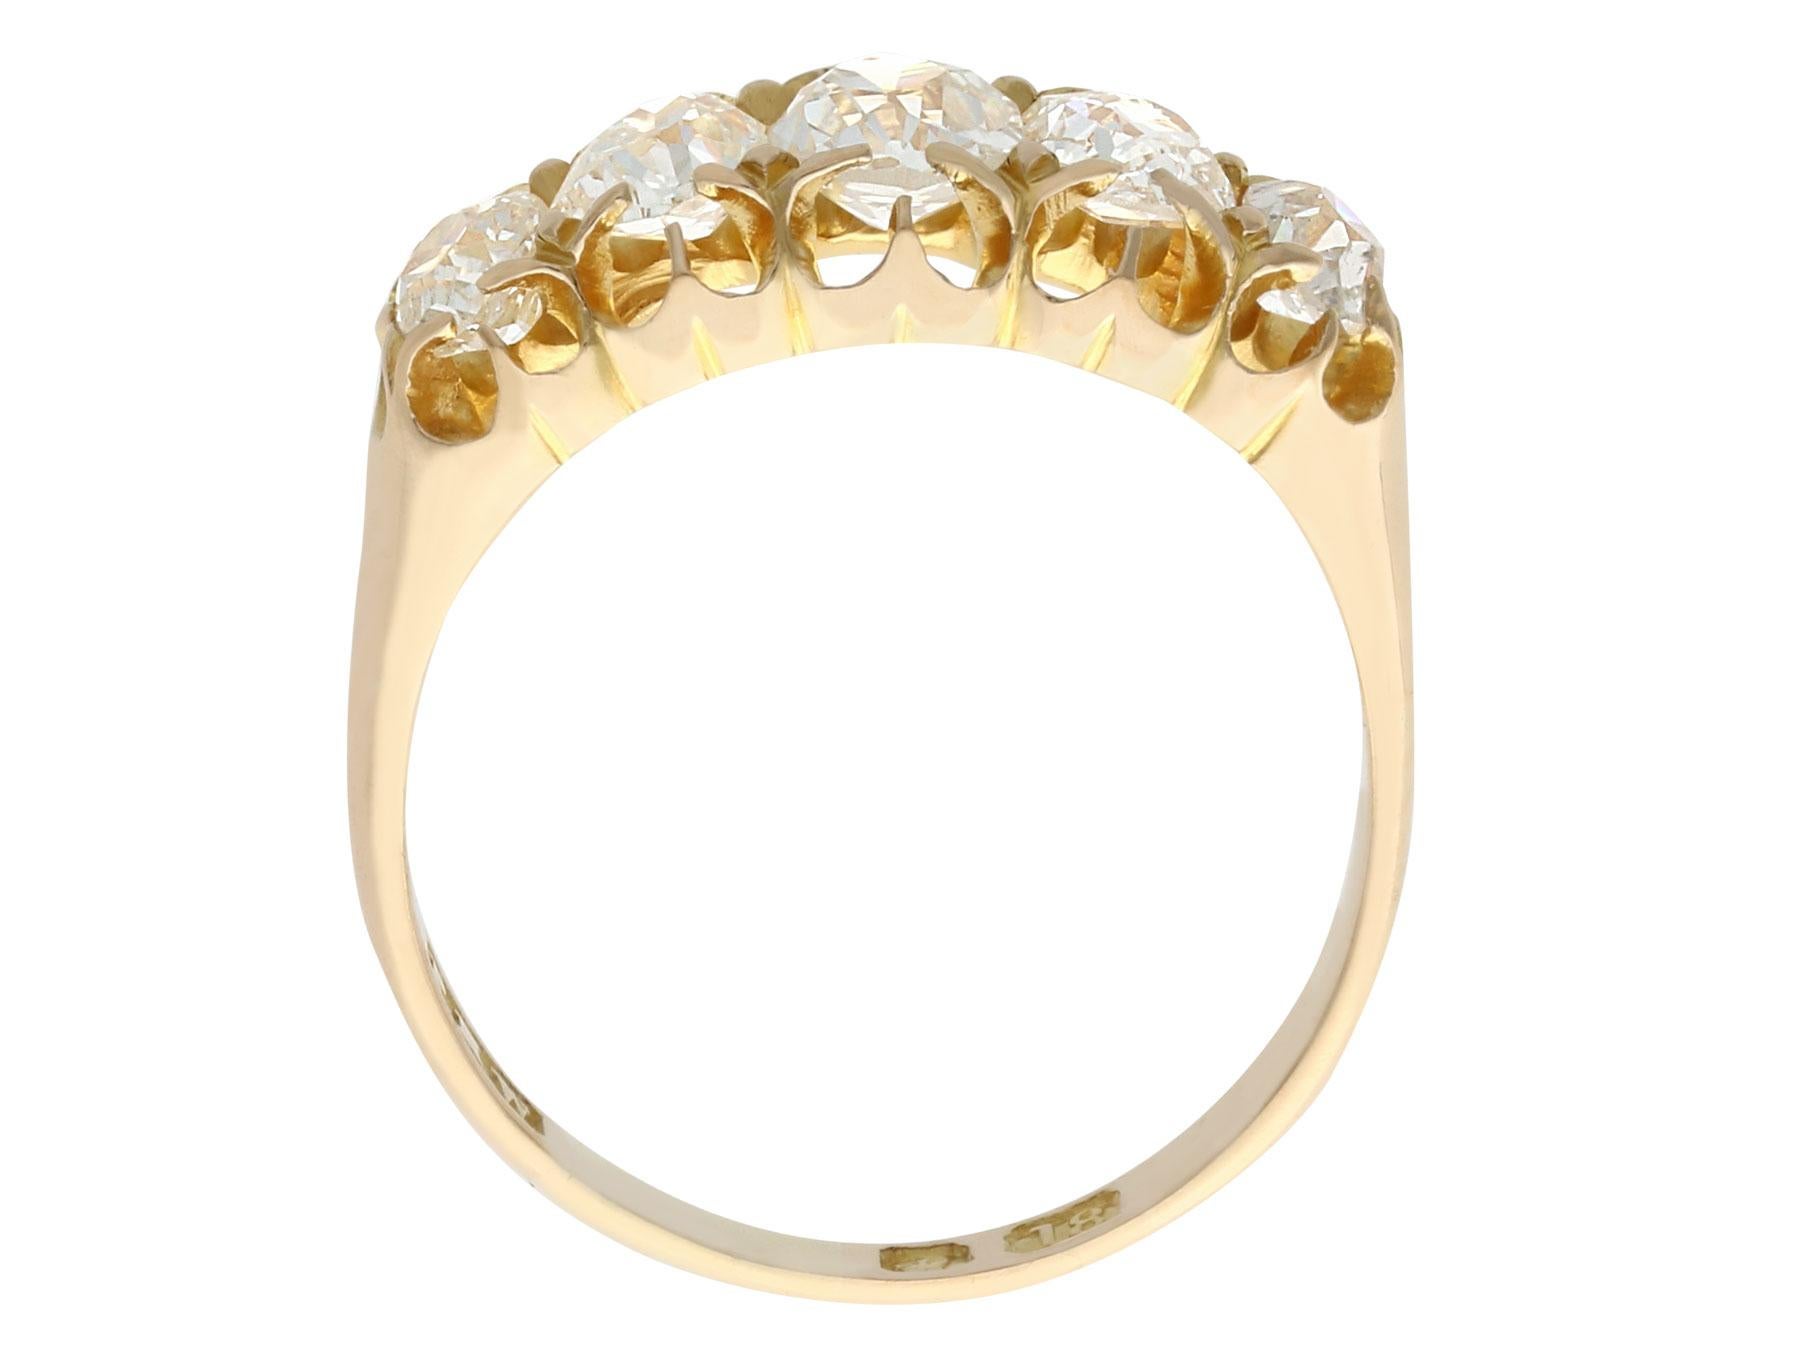 1858 Antique 1.51 Carat Diamond and Yellow Gold Five-Stone Ring 1